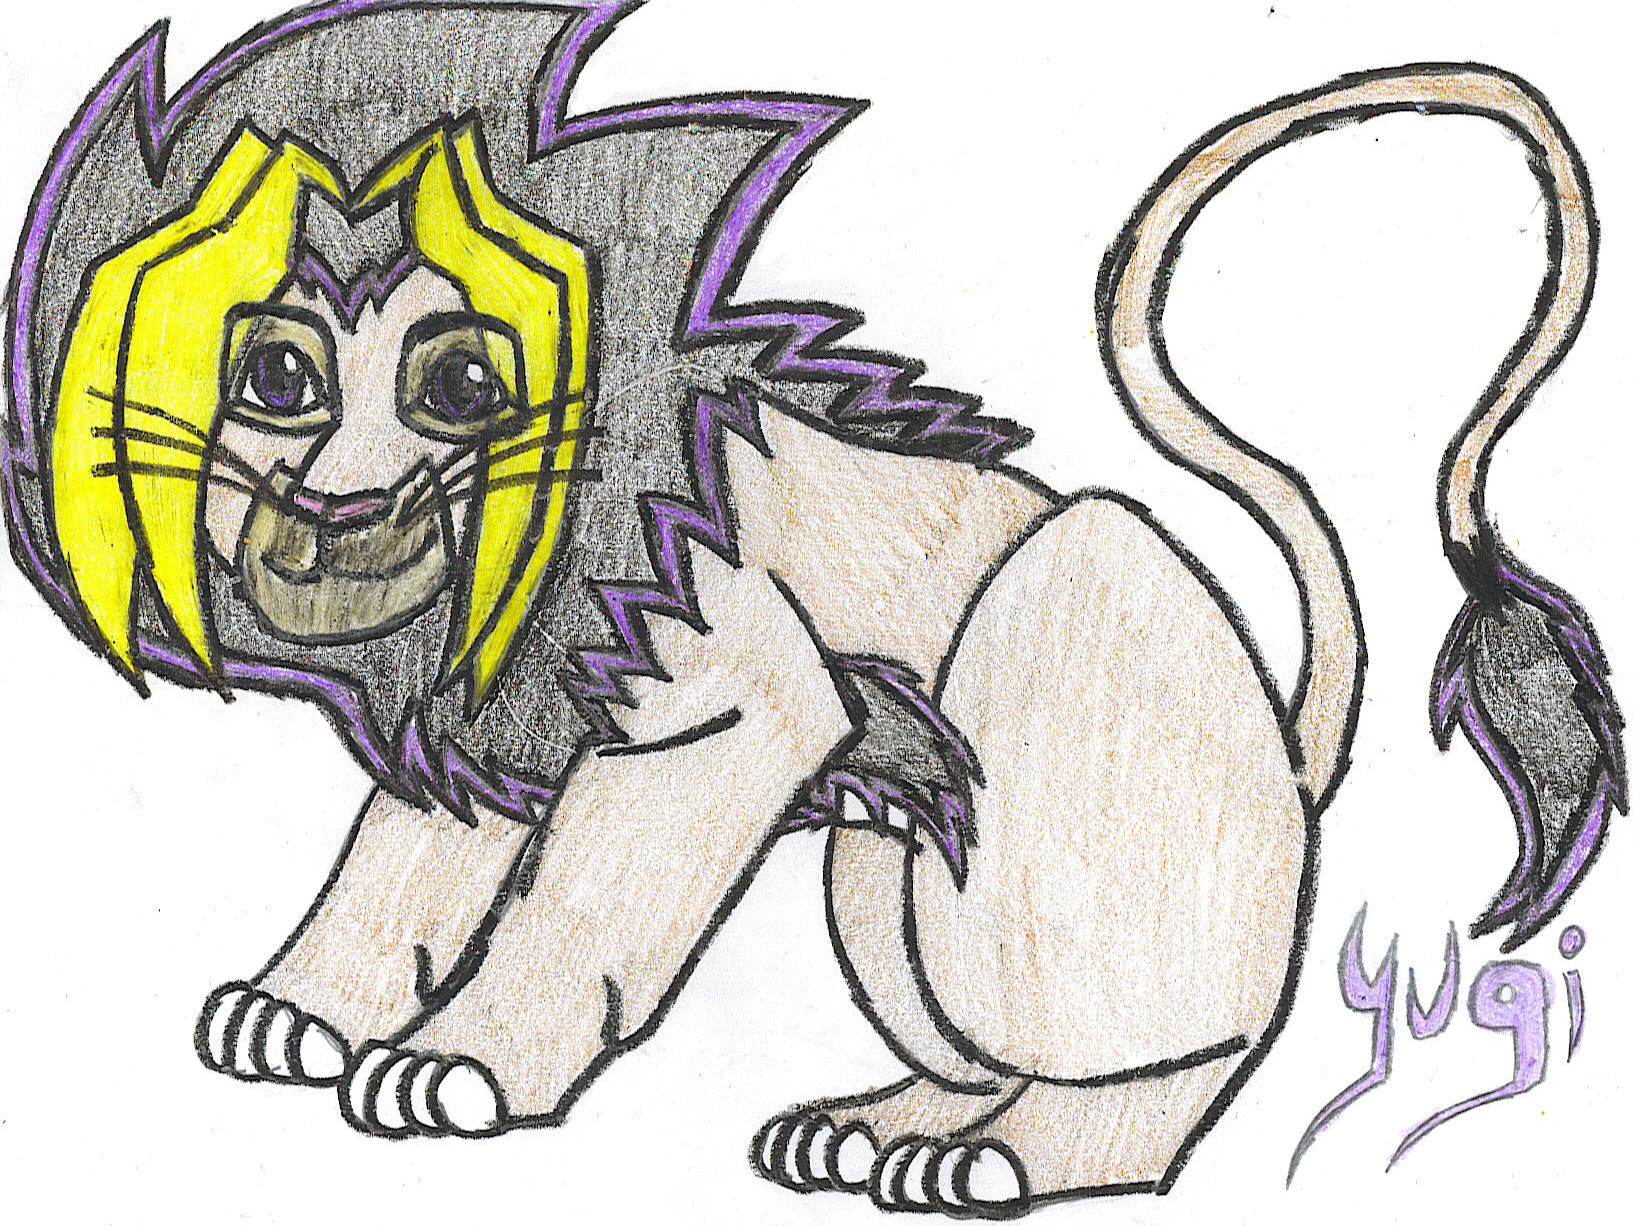 Yugi as a Lion by Yami_And_The_Fallen_Angel